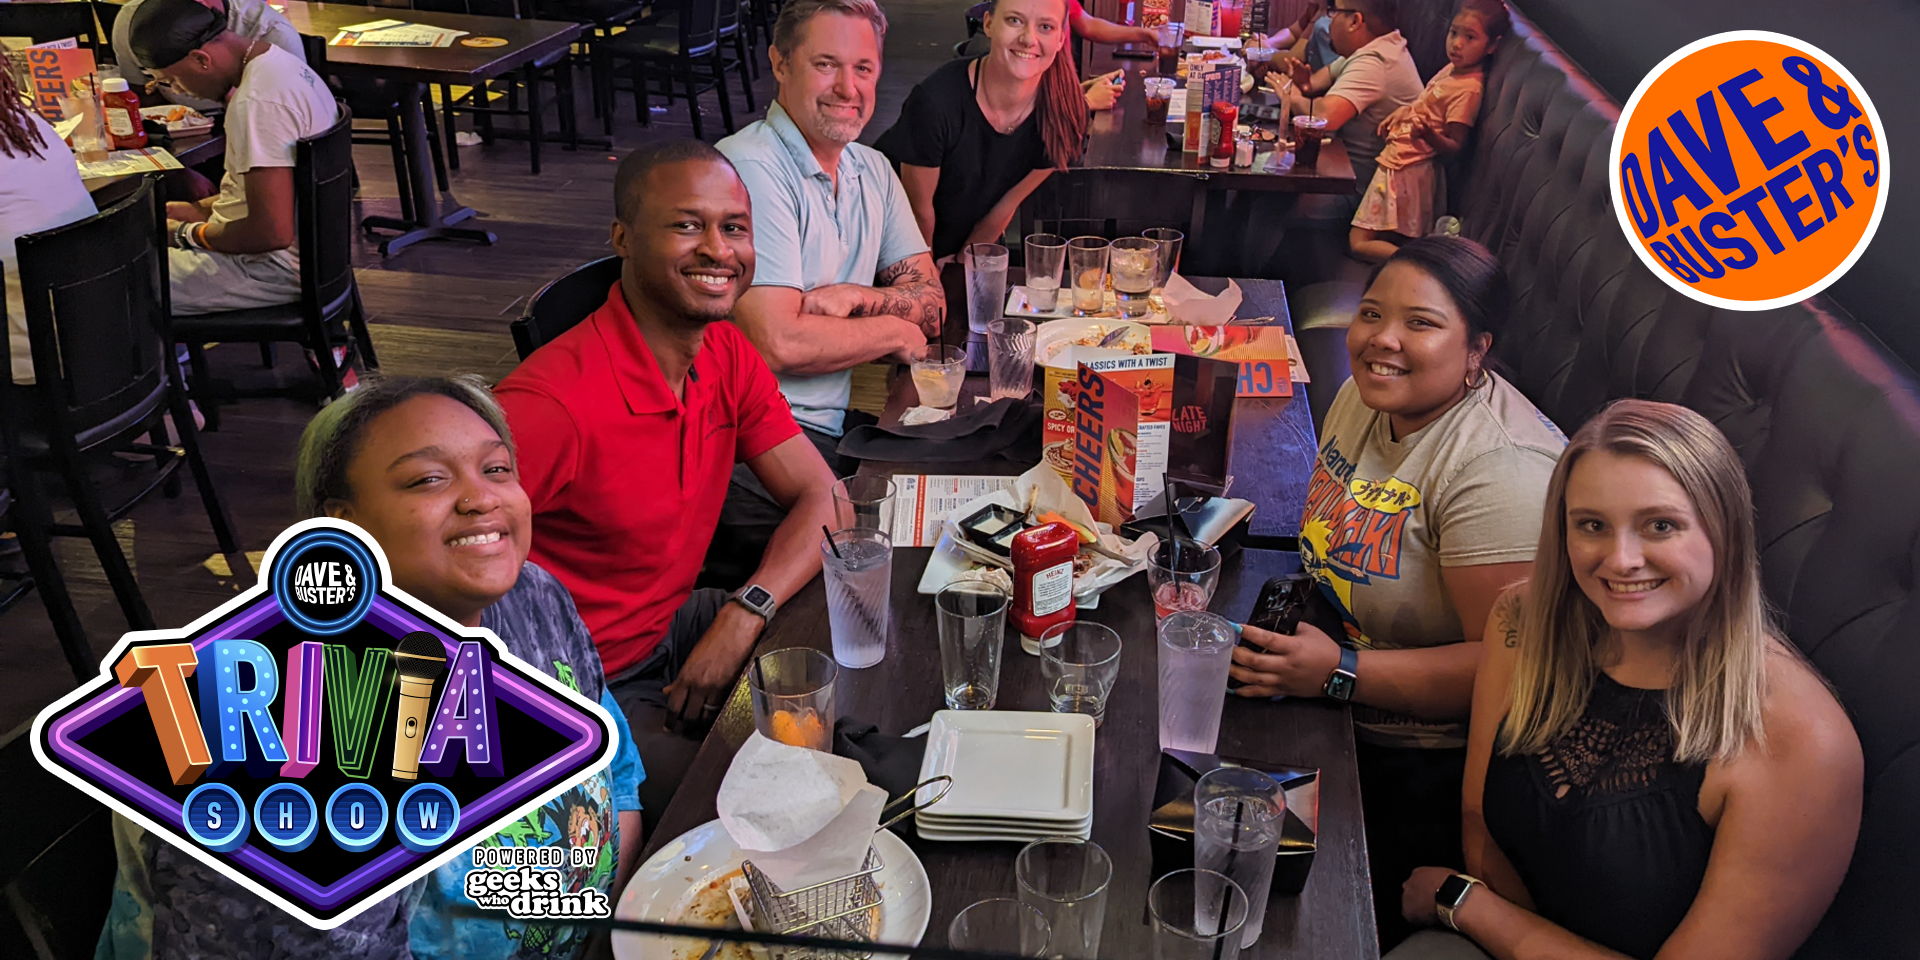 Geeks Who Drink Trivia Night at Dave and Buster's - Pelham Manor promotional image